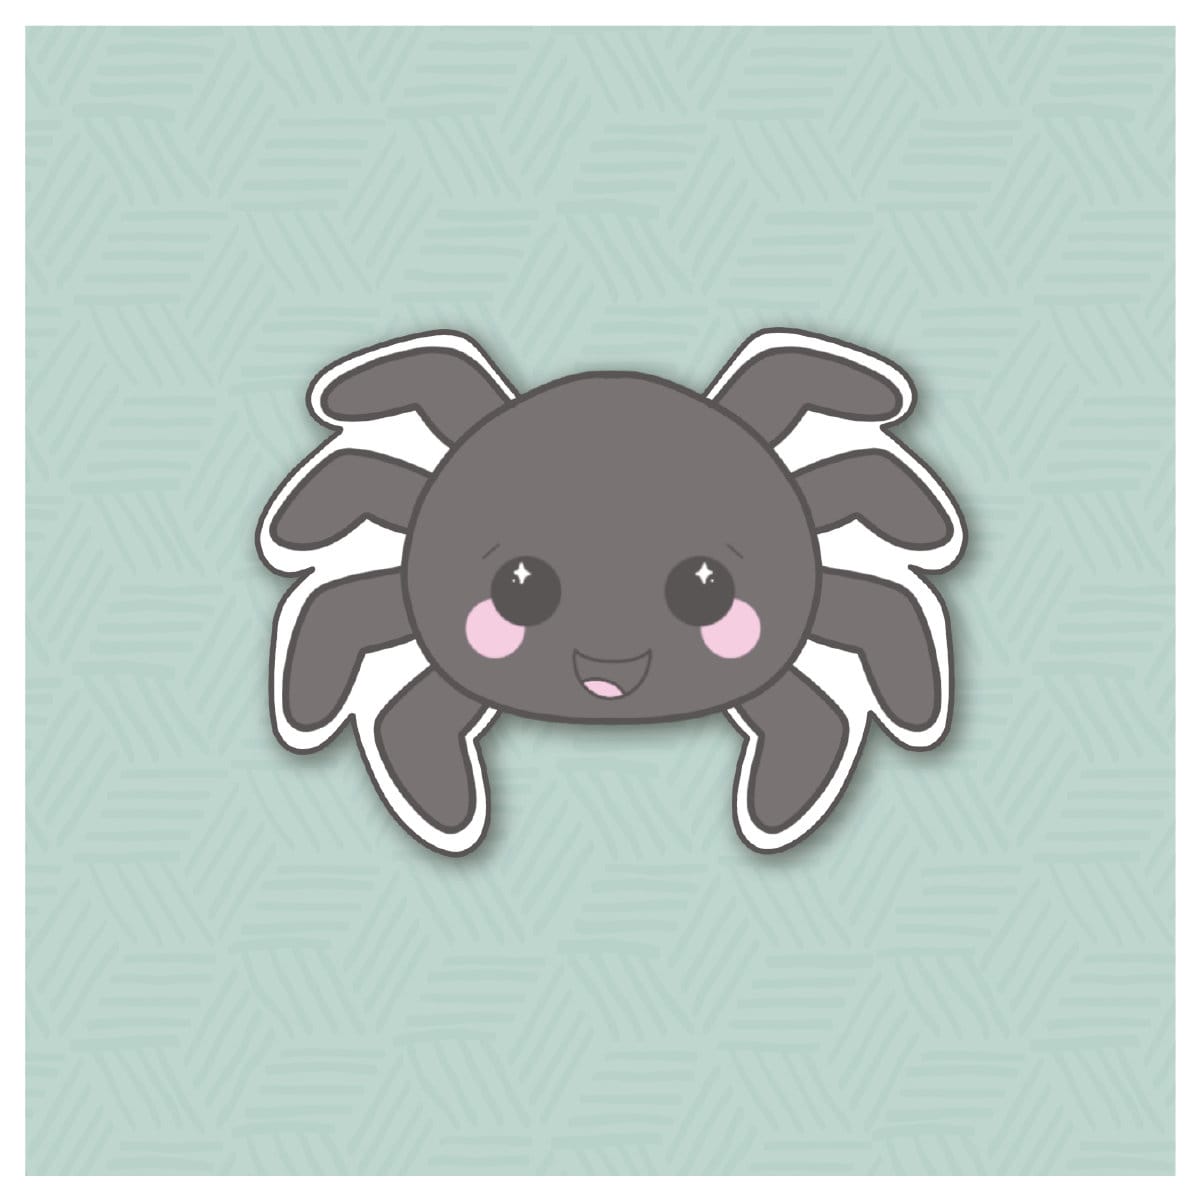 Chunky Spider Cookie Cutter